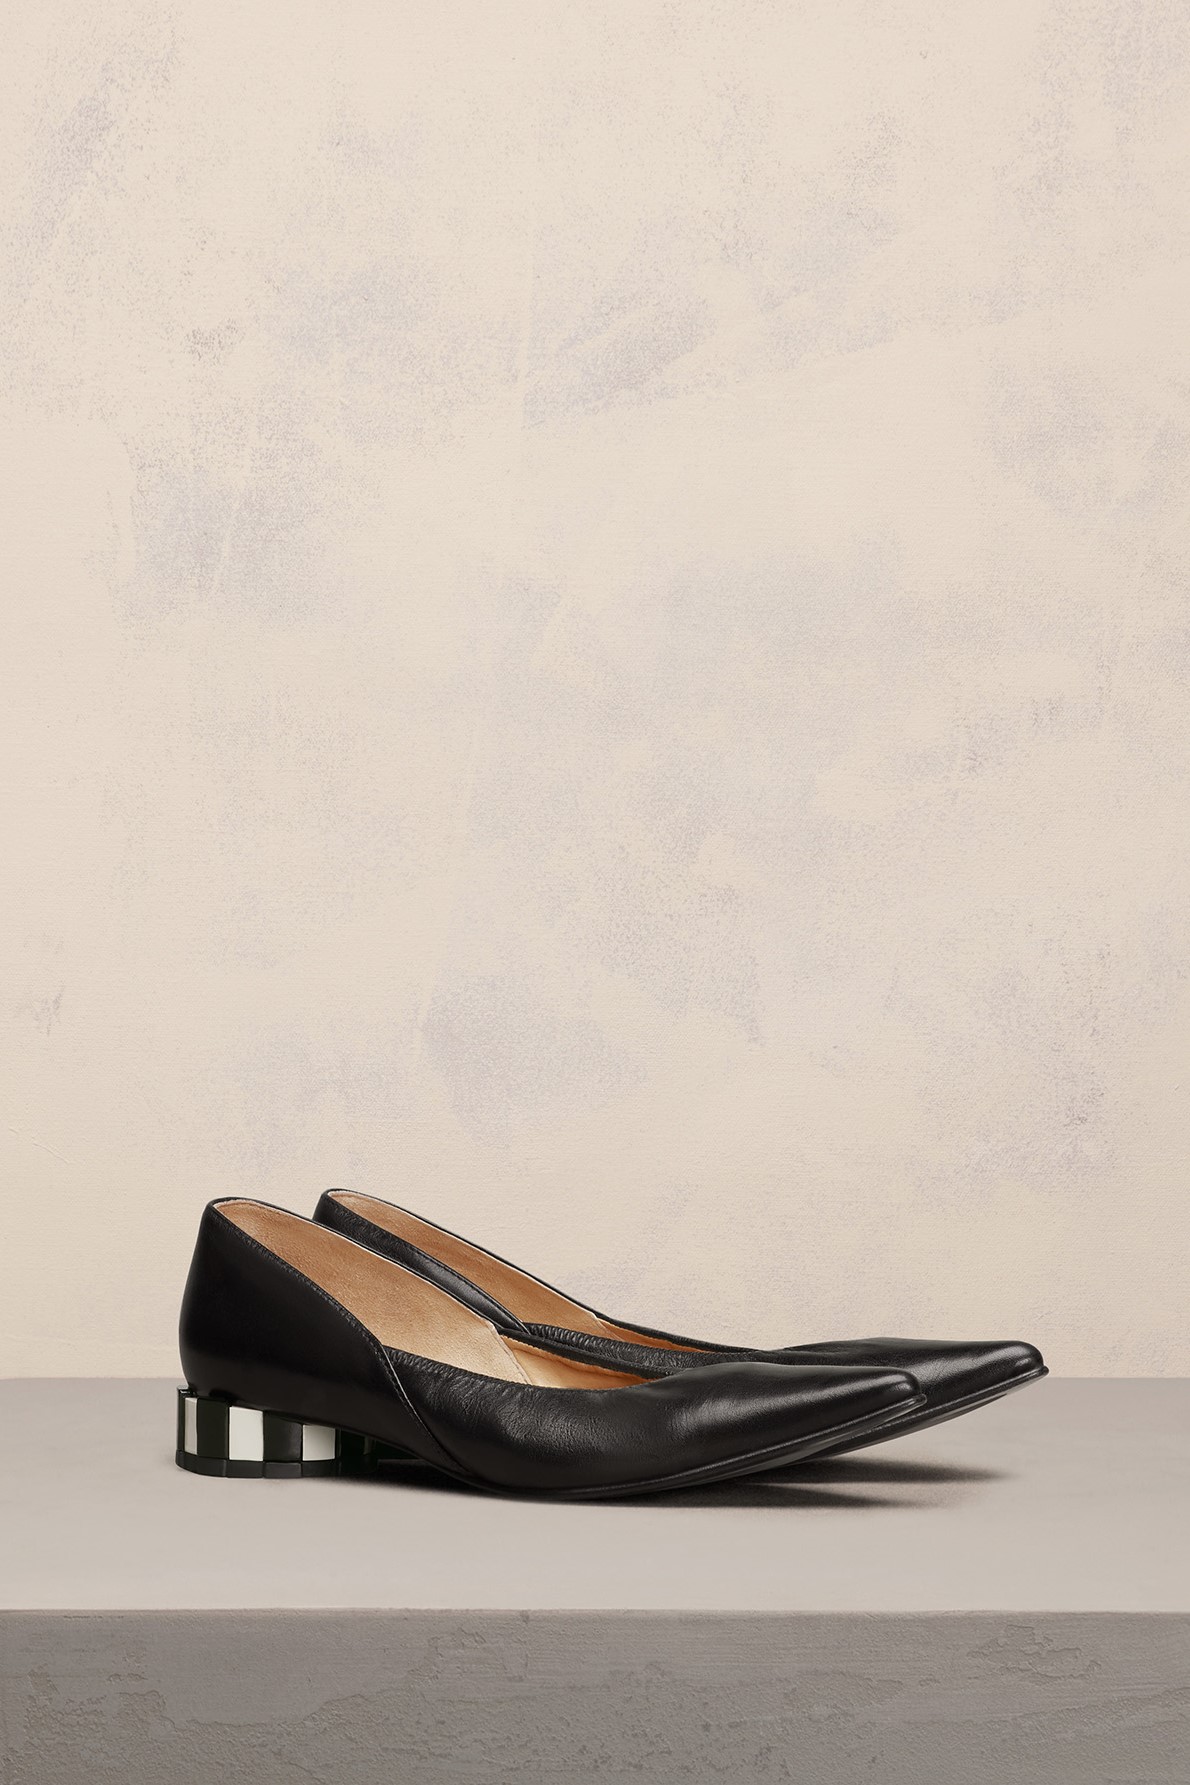 AMI PARIS Pointed Toe Pleated Shoes in Black